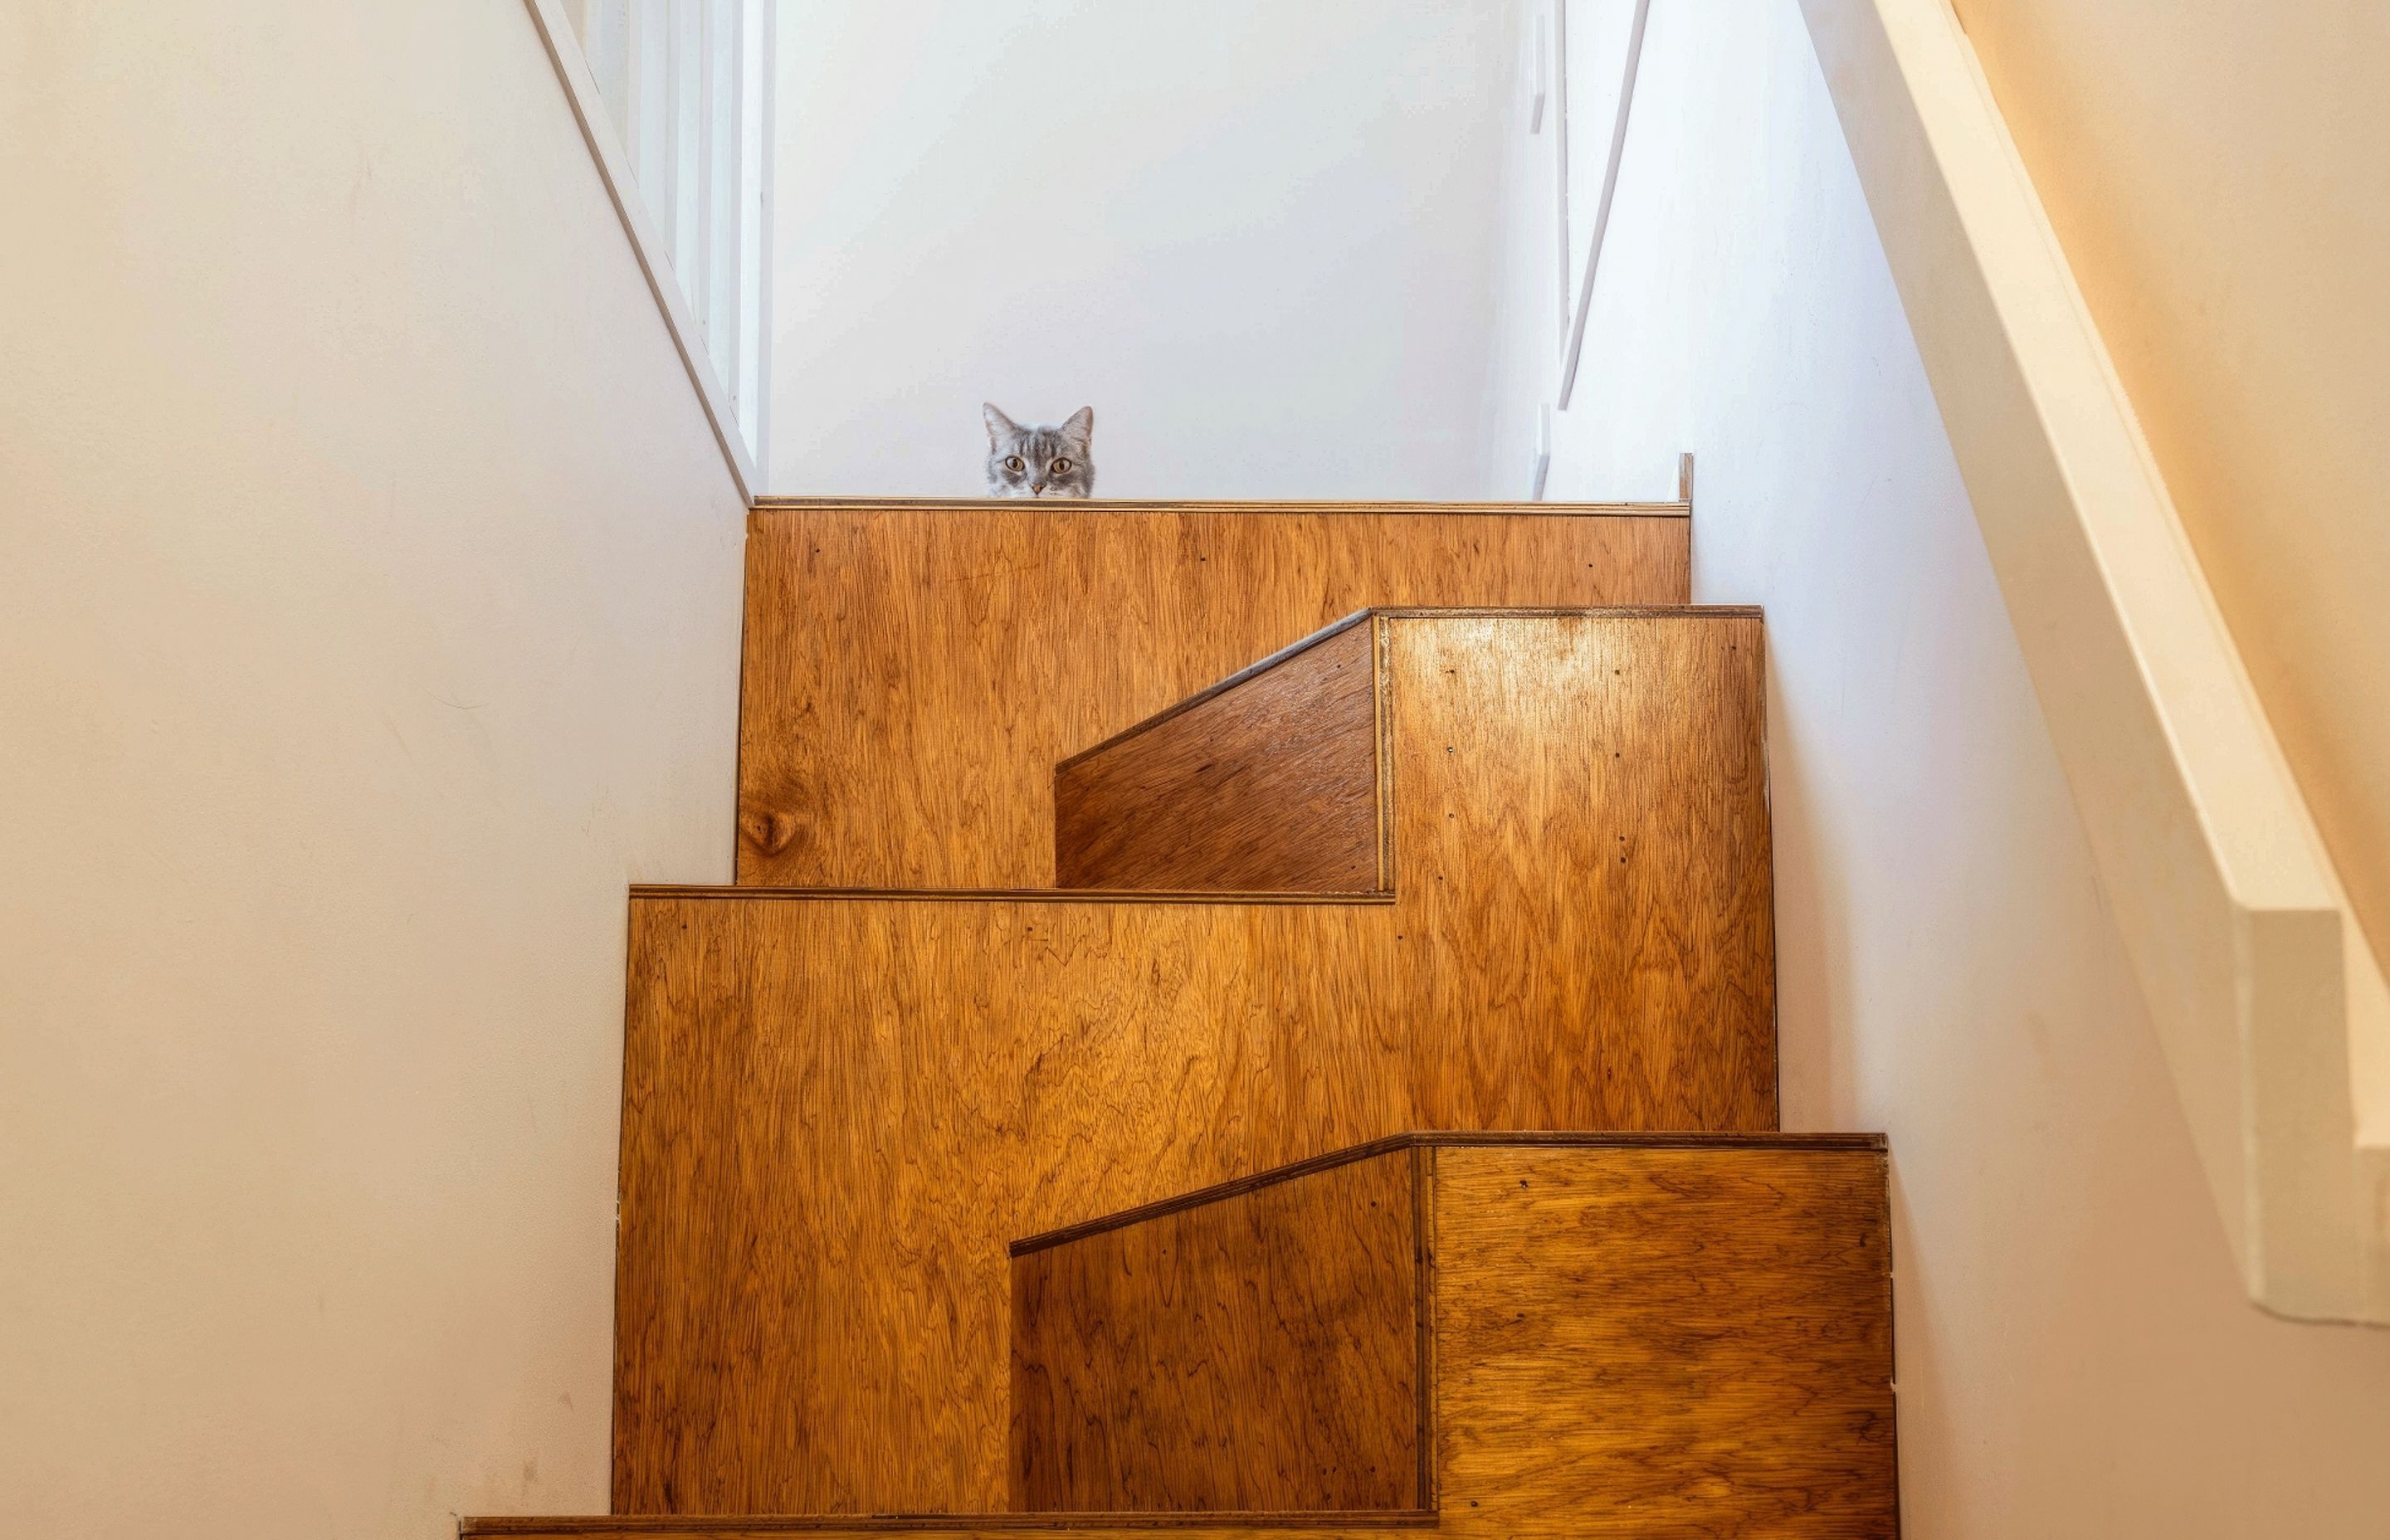 petersham-albany-project-stairs2-gigapixel-high-fidelity-1950w.jpeg